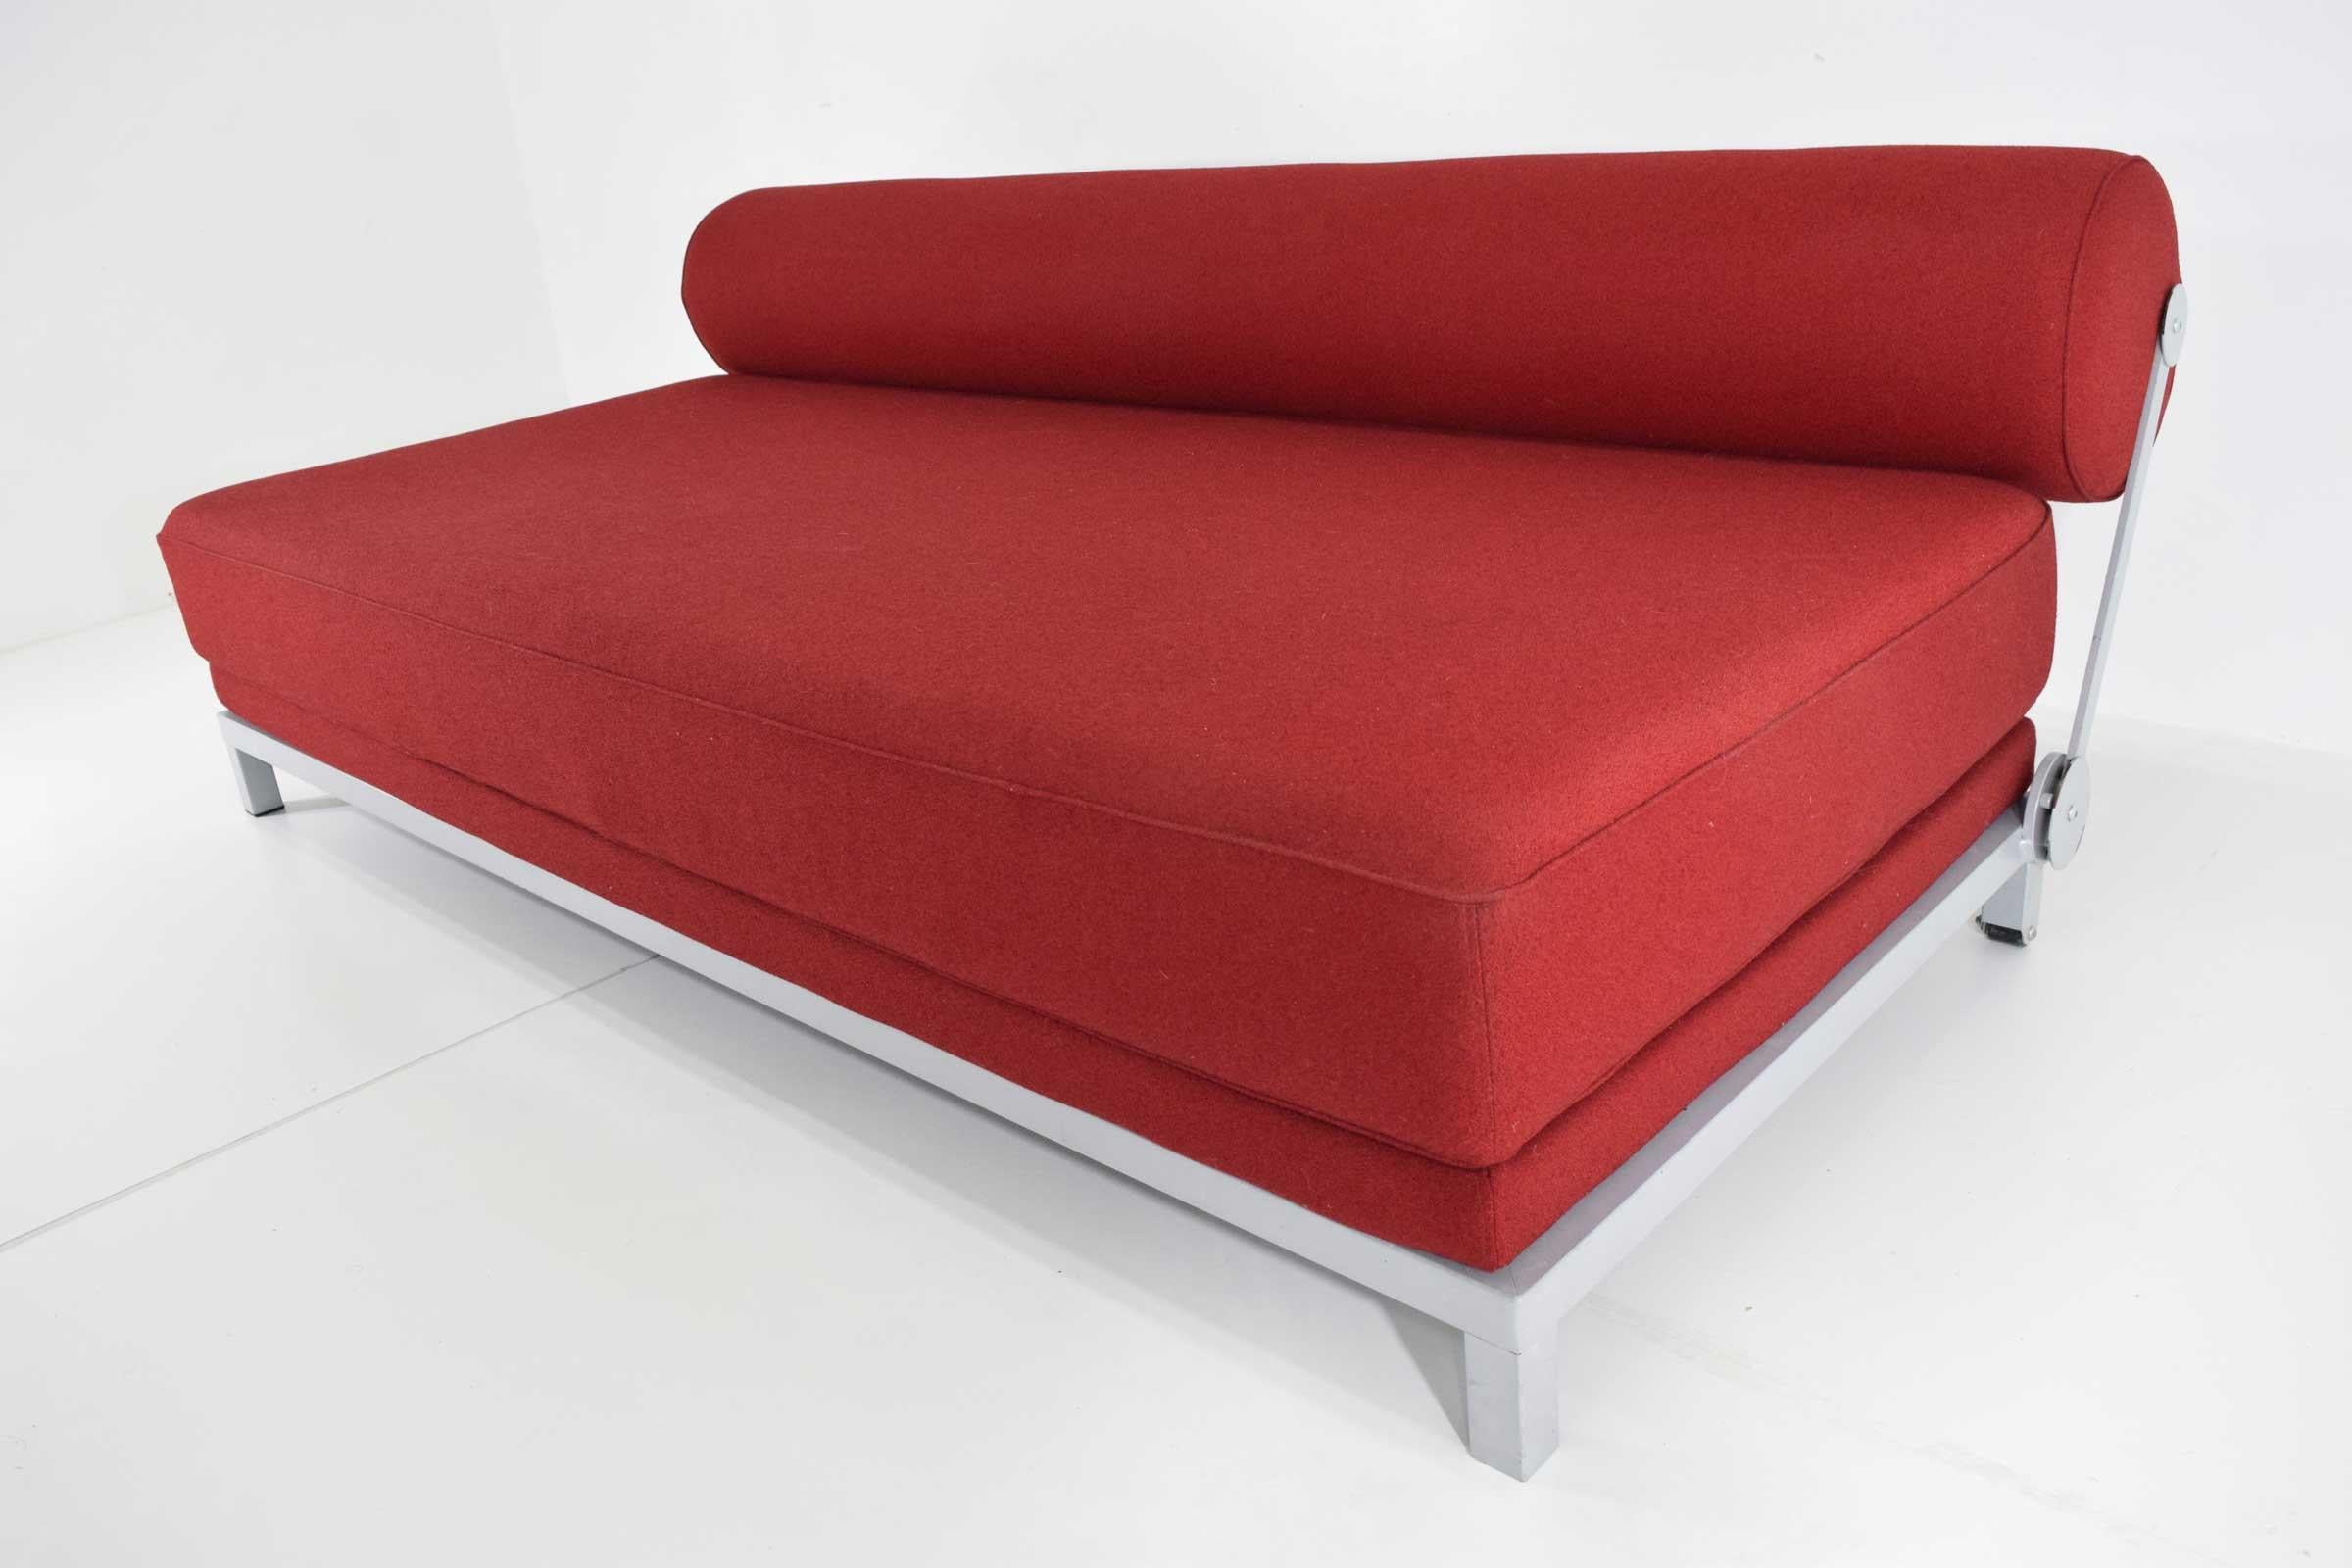 Contemporary Fleming Busk for Softline Twilight Sleeper Sofa in Red